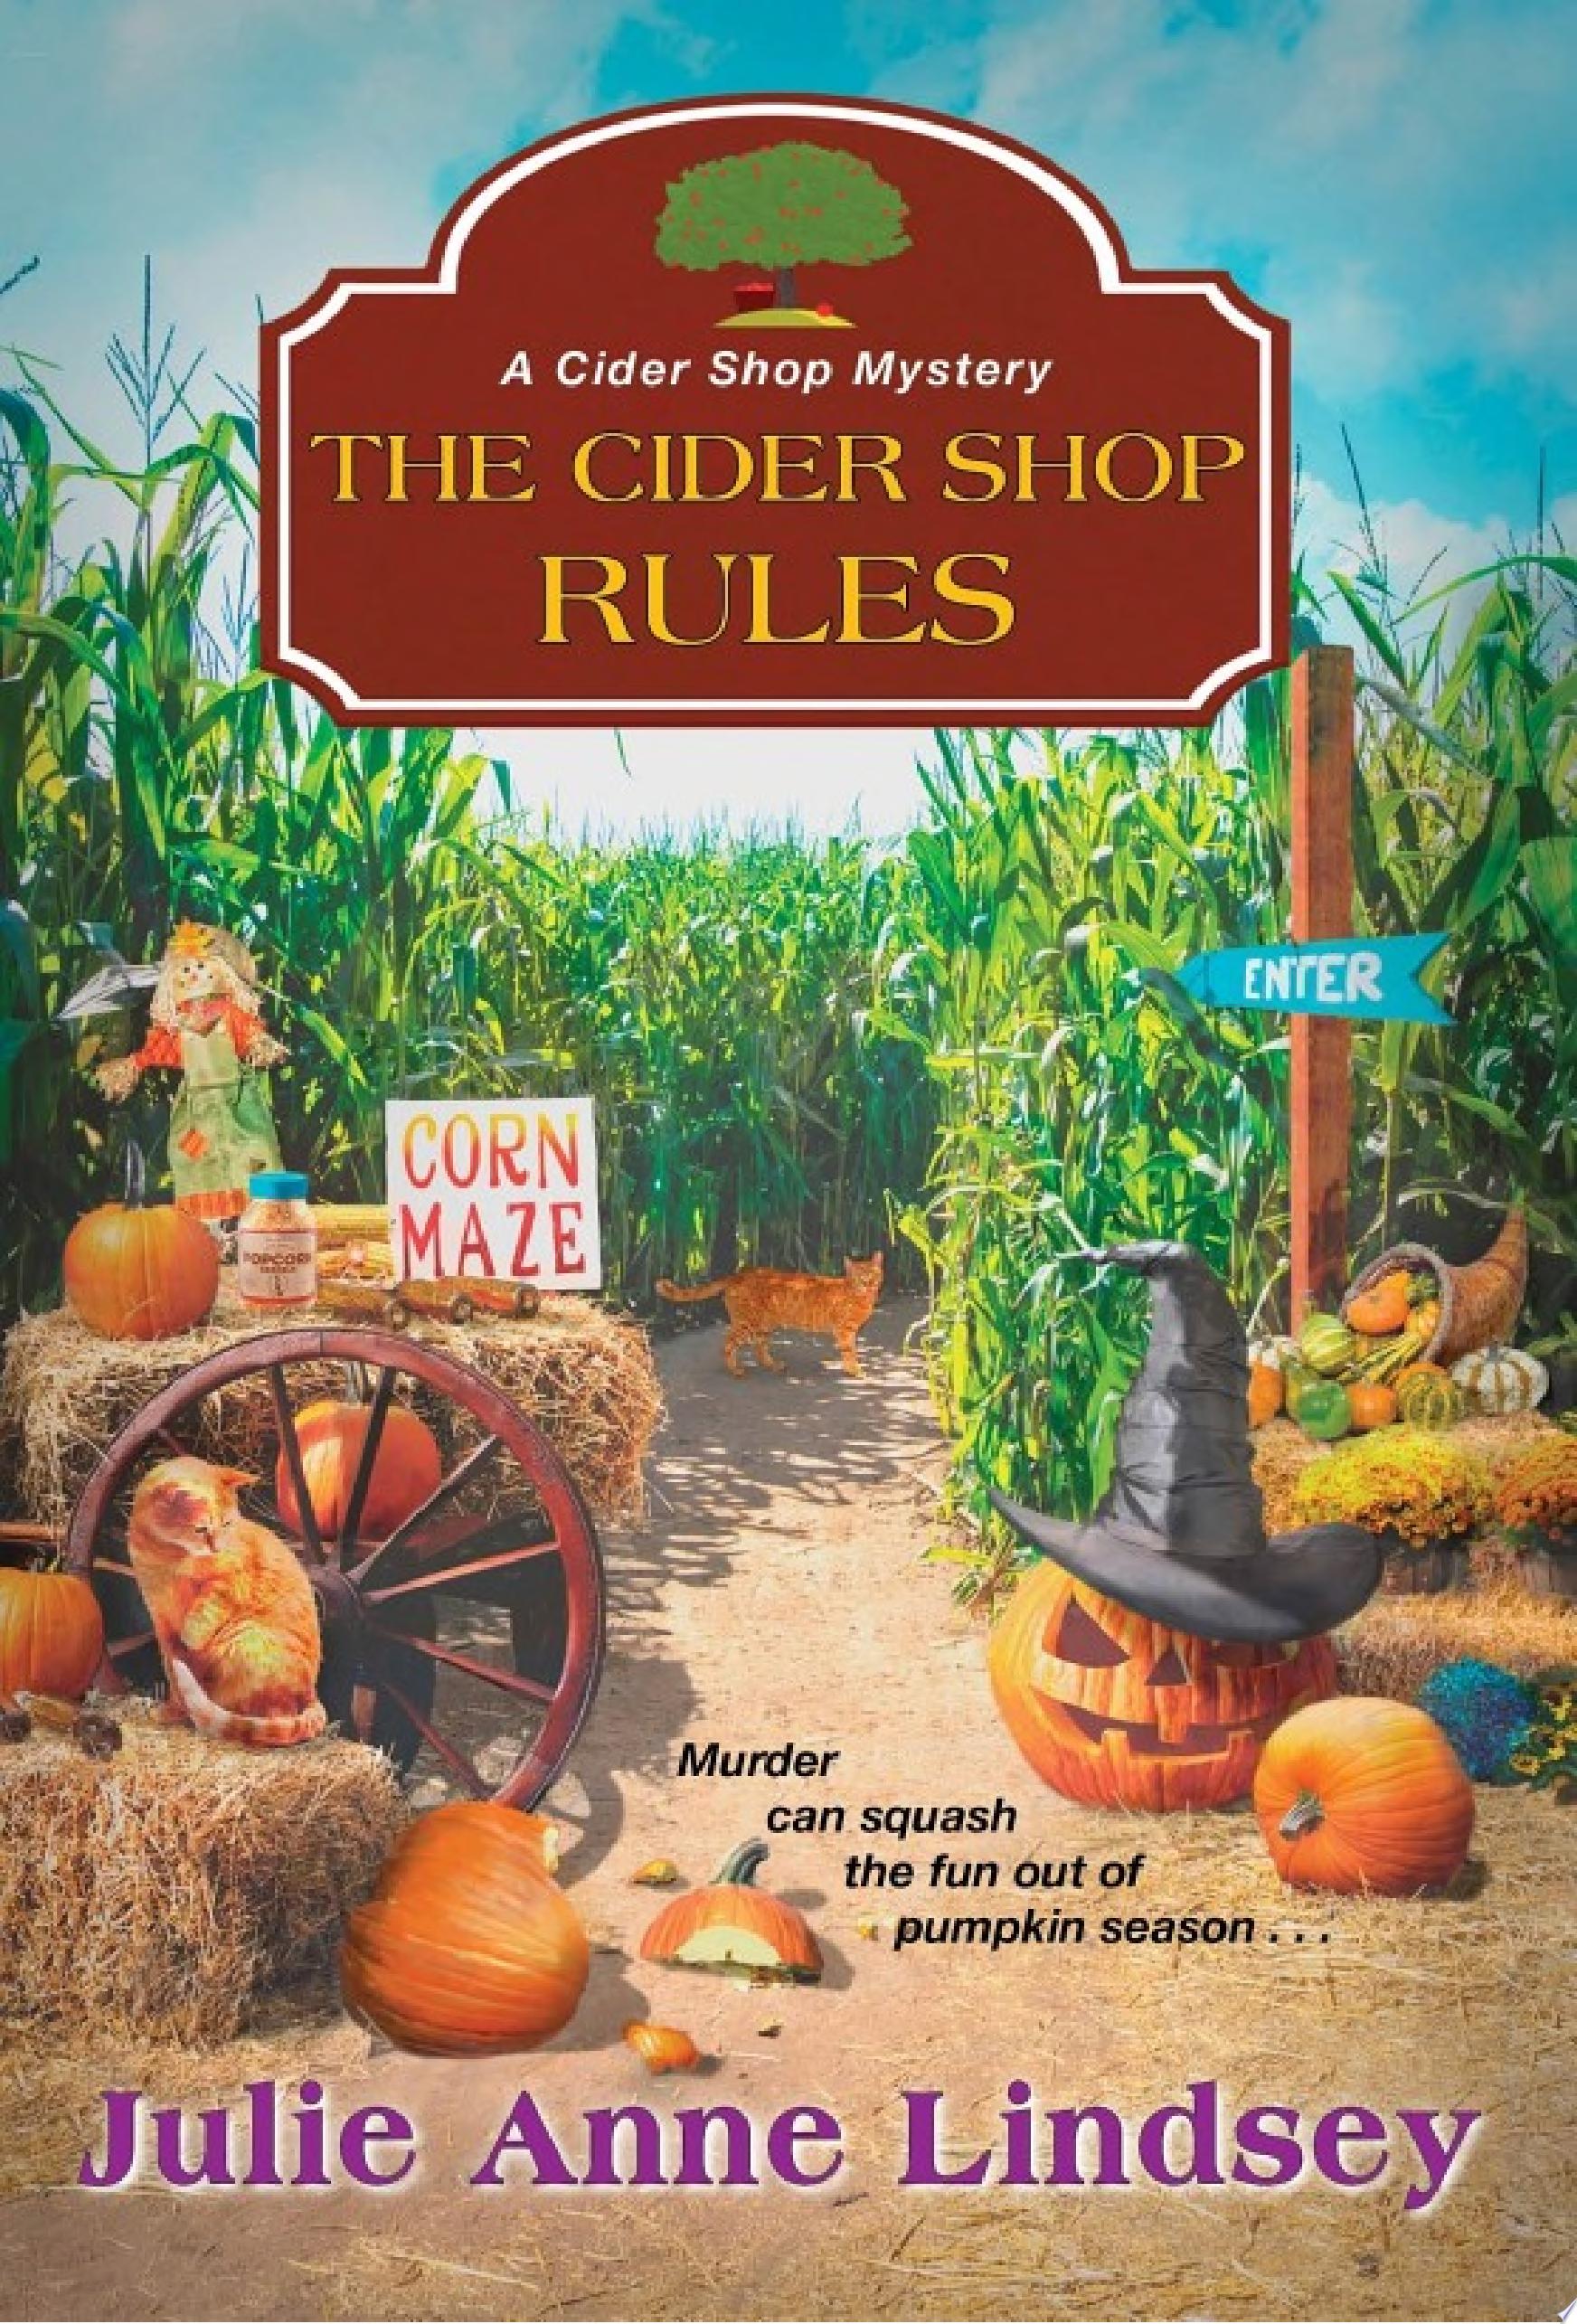 Image for "The Cider Shop Rules"